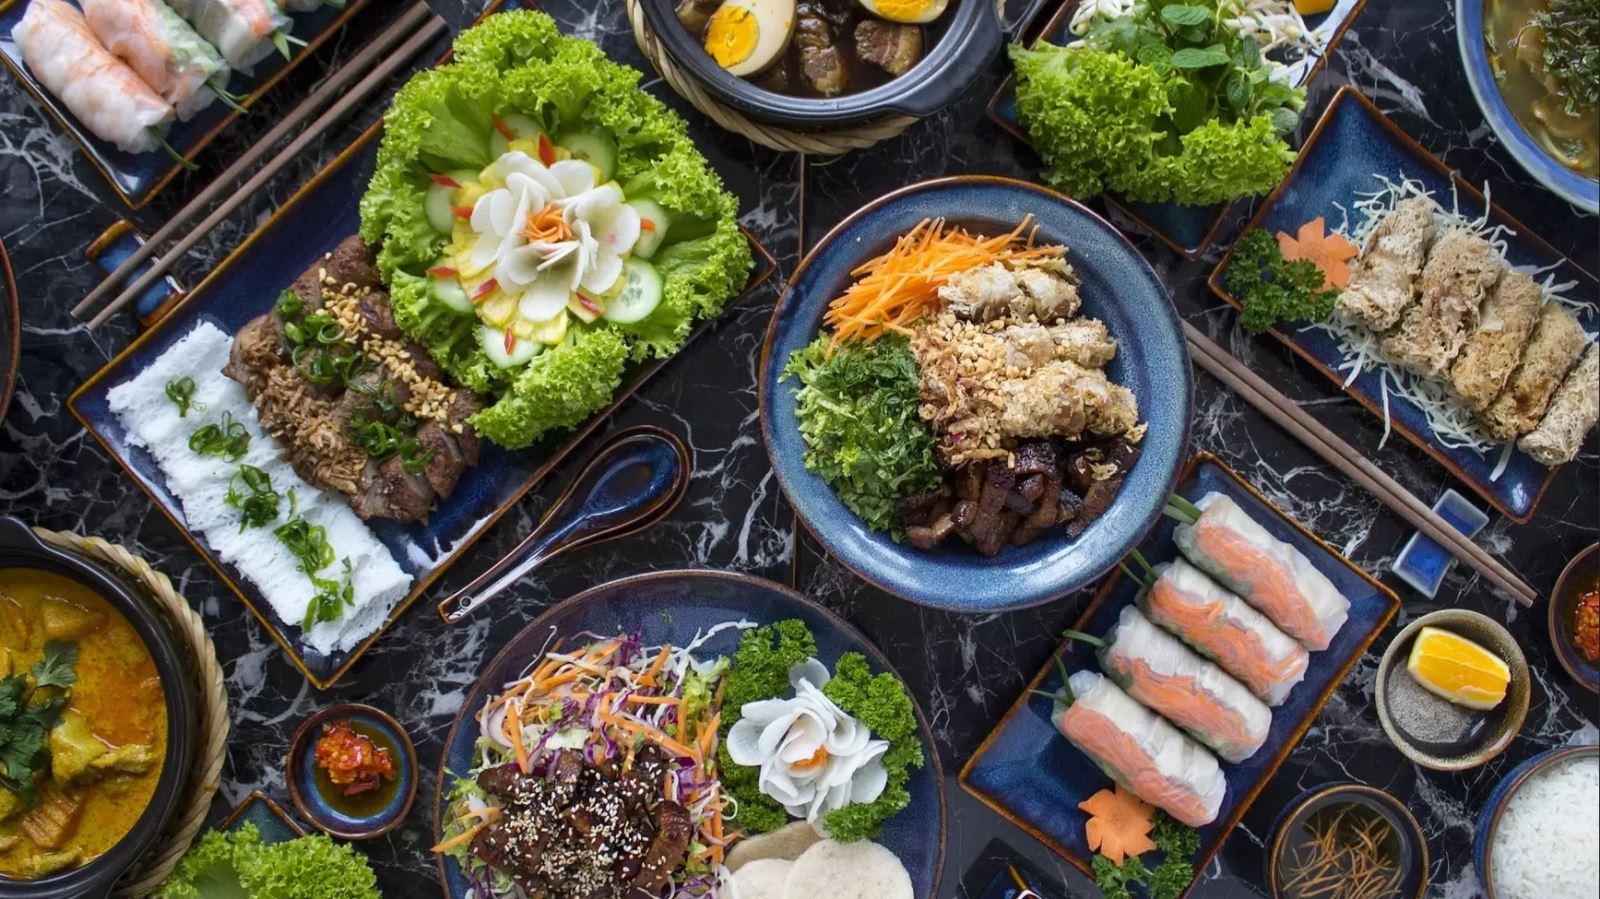 Ultimate List of Must-Try Dishes While in Vietnam